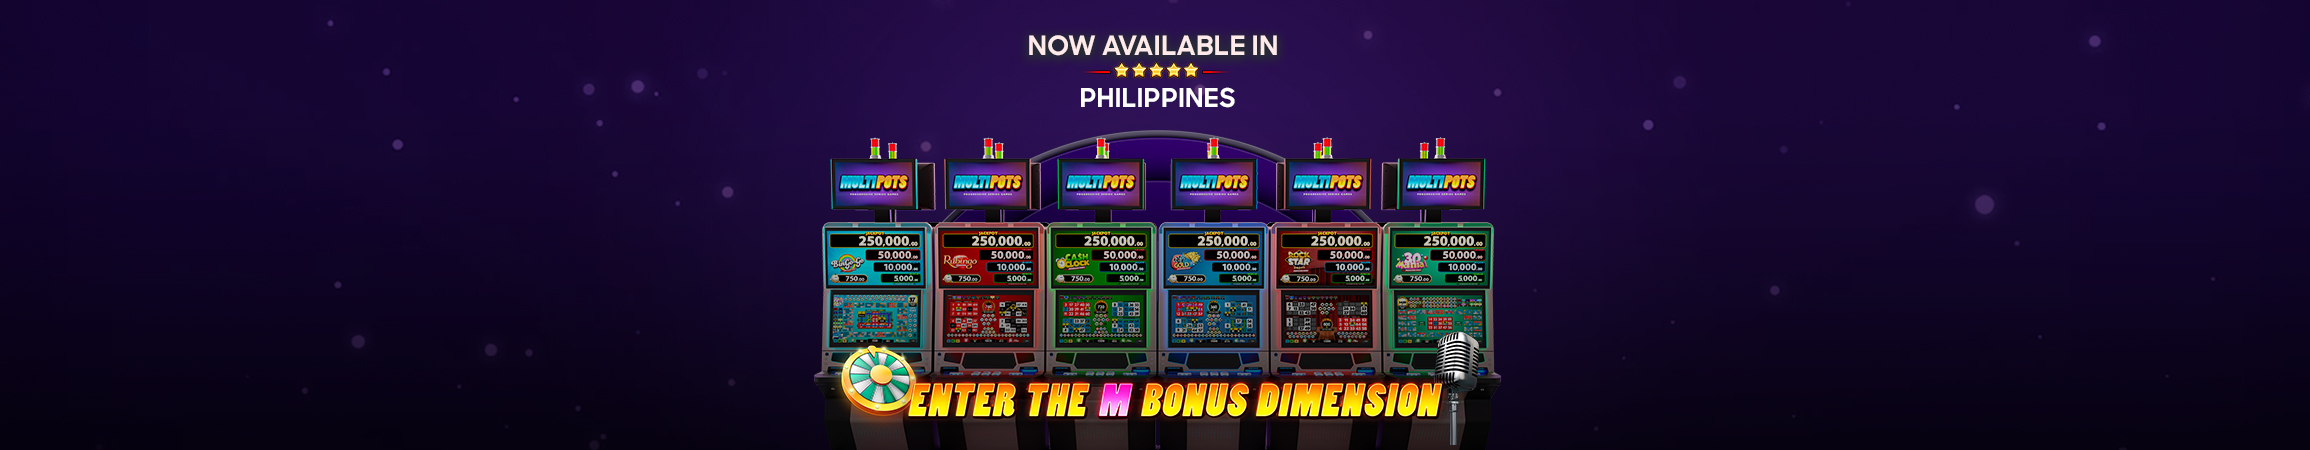 The rewarding power of Multipots arrived in the Philippines